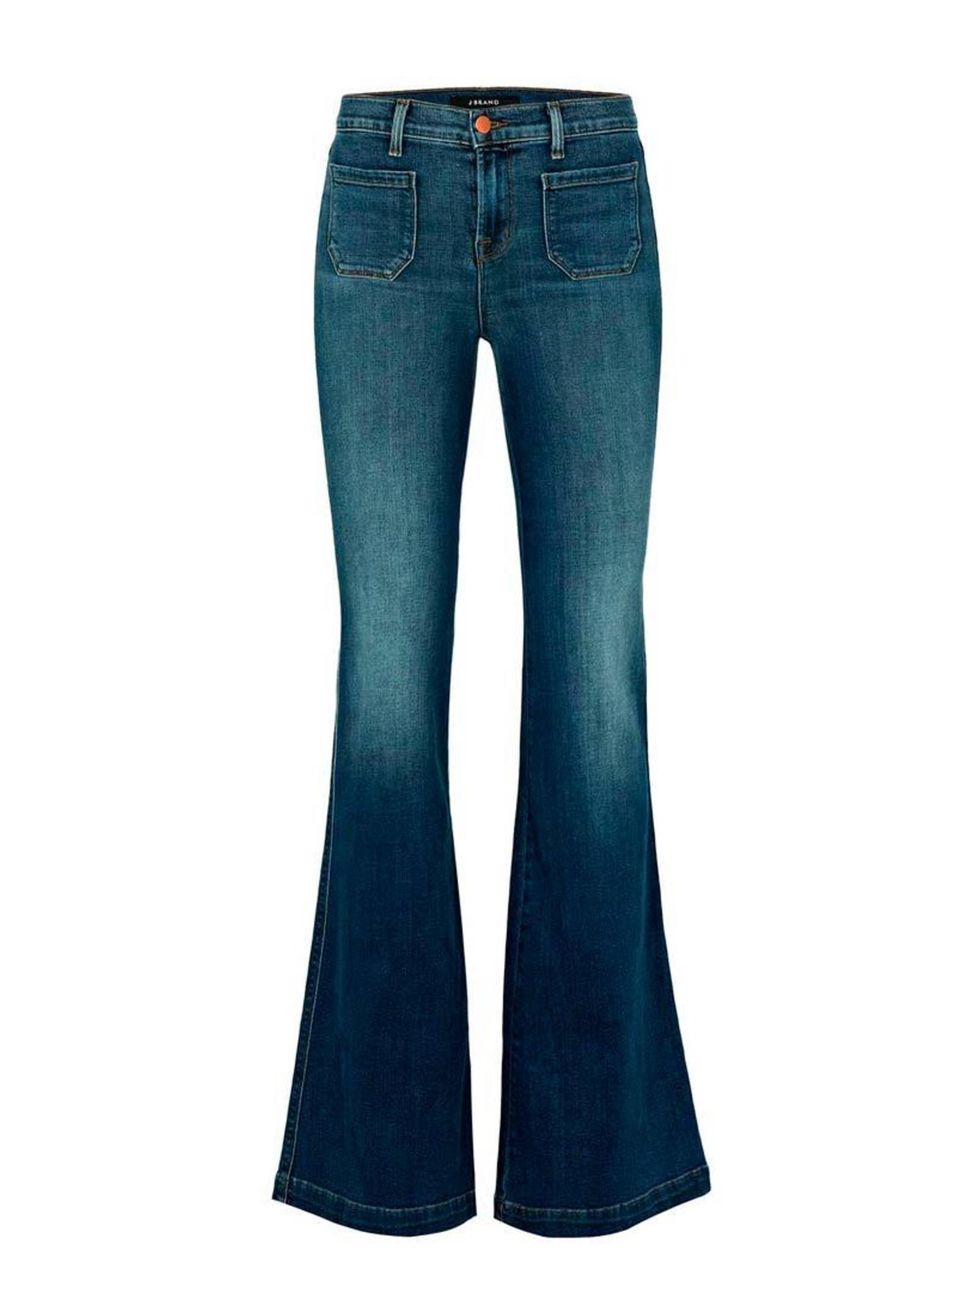 <p>J Brand jeans, £240 at <a href="http://www.trilogystores.co.uk/j-brand/demi-high-rise-flare-in-ashbury.aspx" target="_blank">Trilogy</a></p>